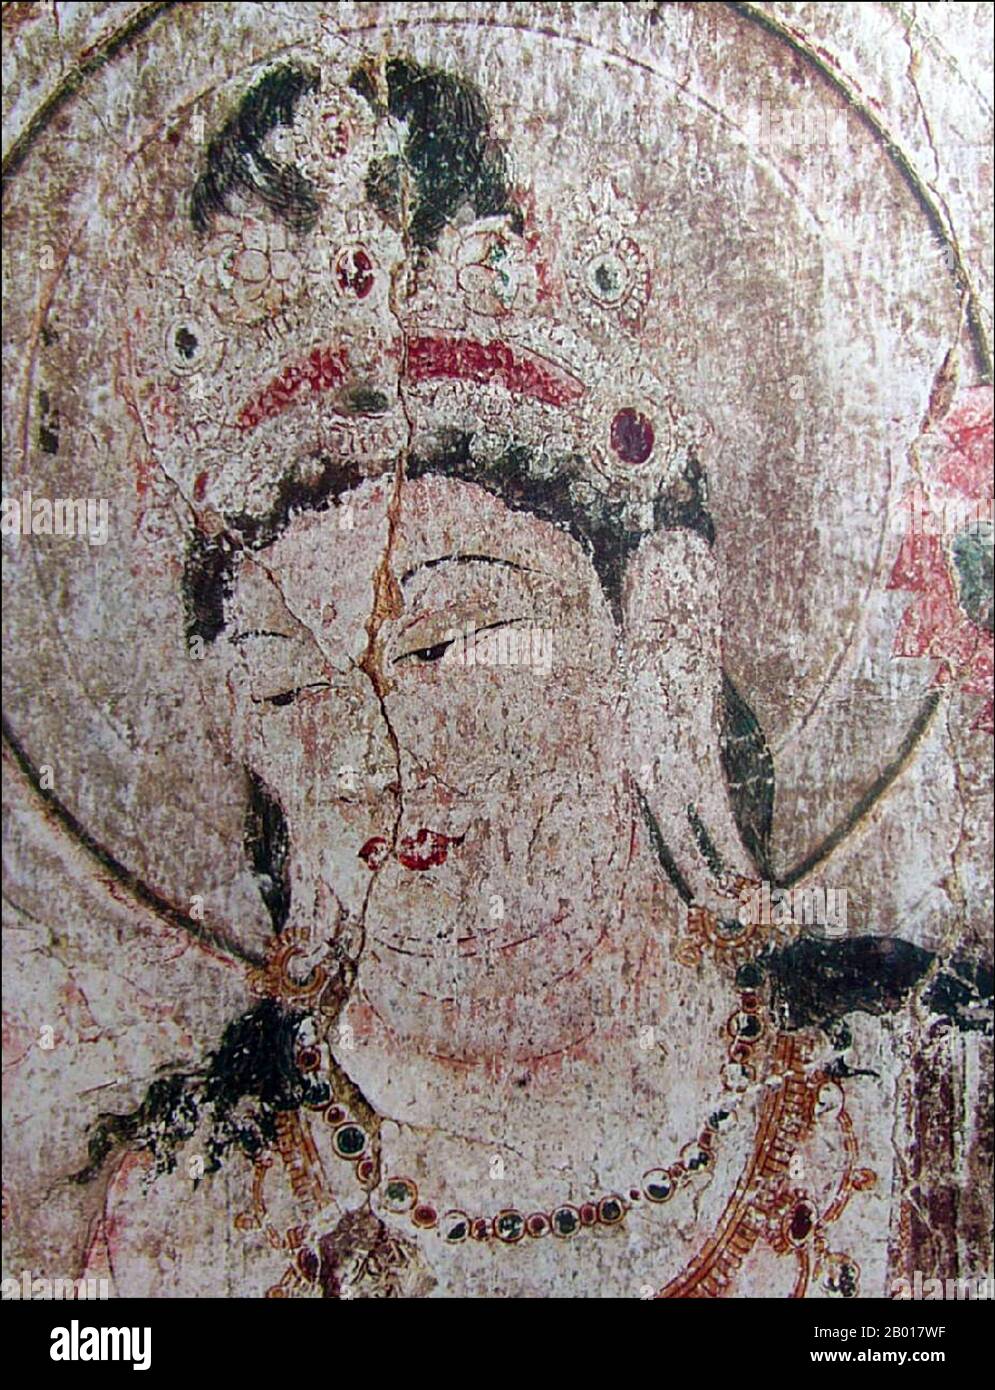 Japan: Lost Horyuji Temple fresco from a pre-1949 photograph: No.2 wall, Bodhisattva, detail of head.  Hōryū-ji (Temple of the Flourishing Law) is a Buddhist temple in Ikaruga, Nara Prefecture, Japan. Its full name is Hōryū Gakumonji, or Learning Temple of the Flourishing Law, the complex serving both as a seminary and a monastery.  In 1993, Hōryū-ji was inscribed as a UNESCO World Heritage Site under the name Buddhist Monuments in the Hōryū-ji Area. The Japanese government lists several of its structures, sculptures and artifacts as National Treasures. Stock Photo